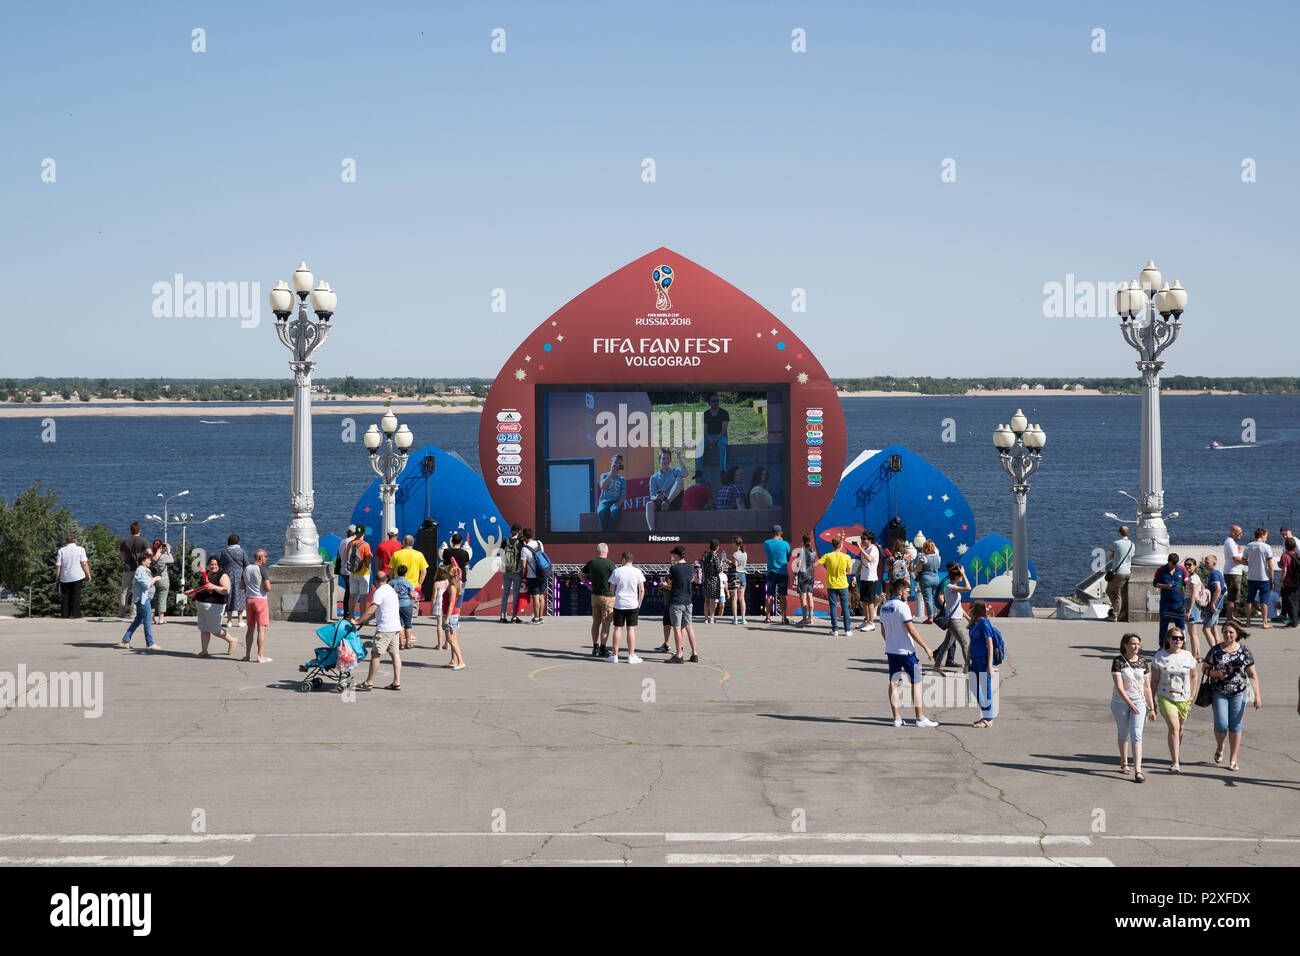 FIFA World Cup 2018: Moscow, Russia Fan Fest Photos, Tour